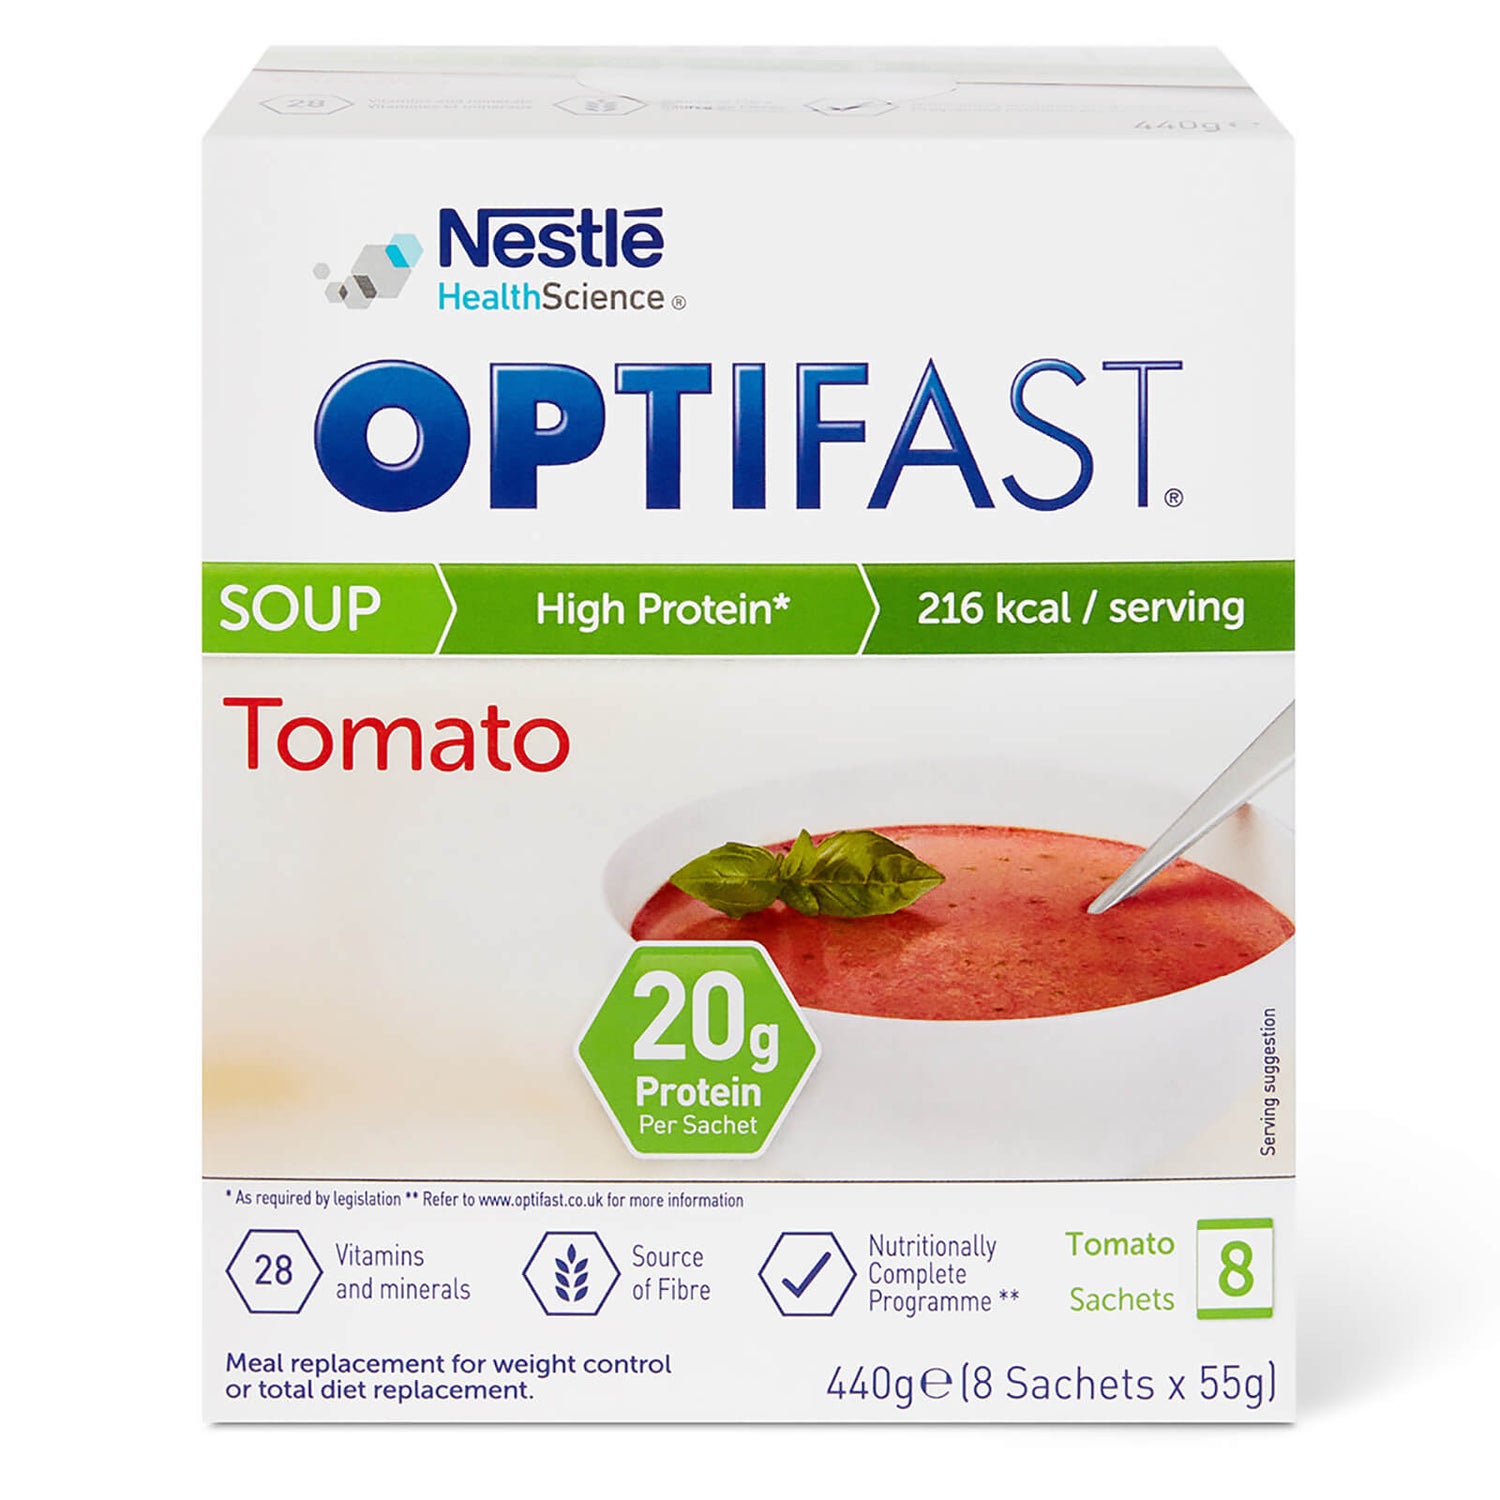 OPTIFAST Soup - Tomato - 1 Month Supply (32 Sachets)